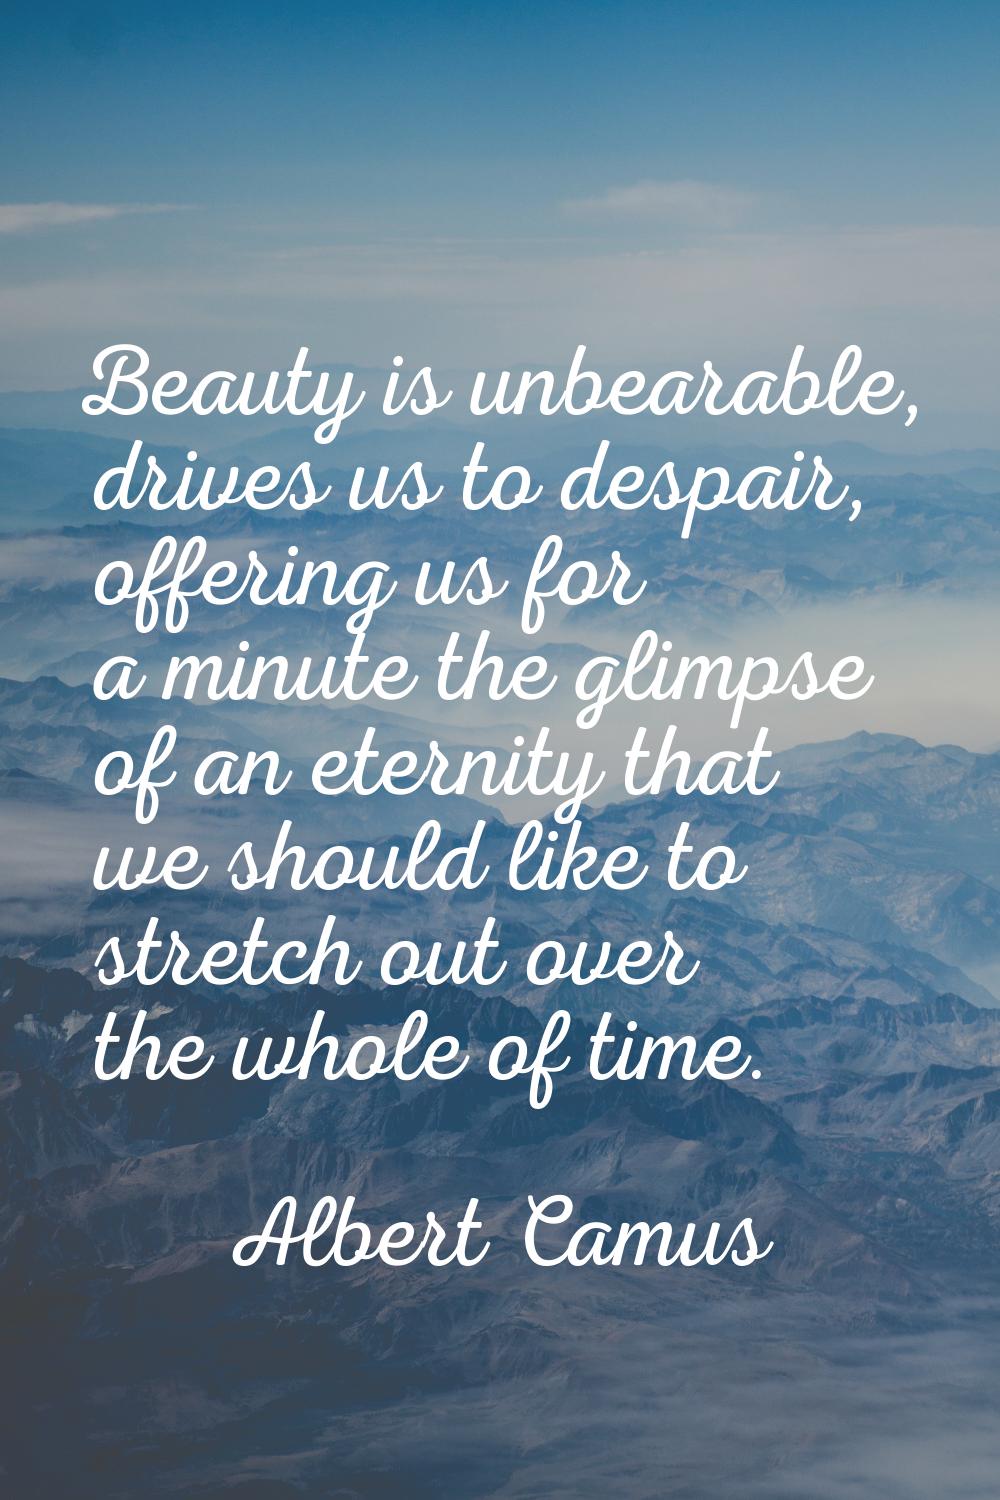 Beauty is unbearable, drives us to despair, offering us for a minute the glimpse of an eternity tha